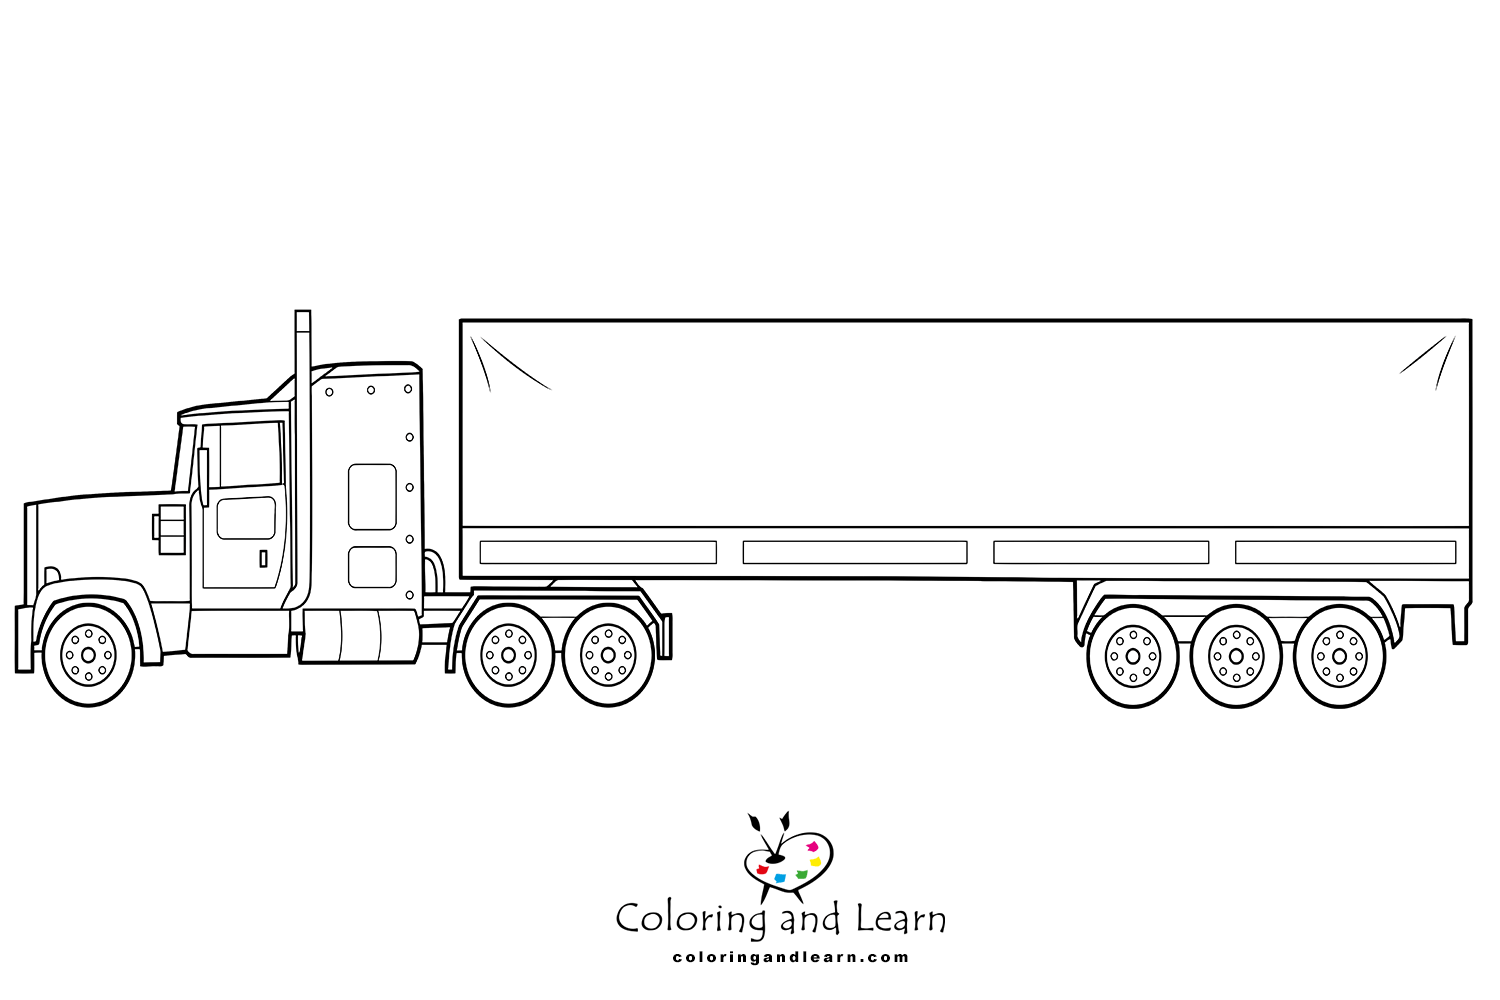 Truck coloring pages rcoloringpages